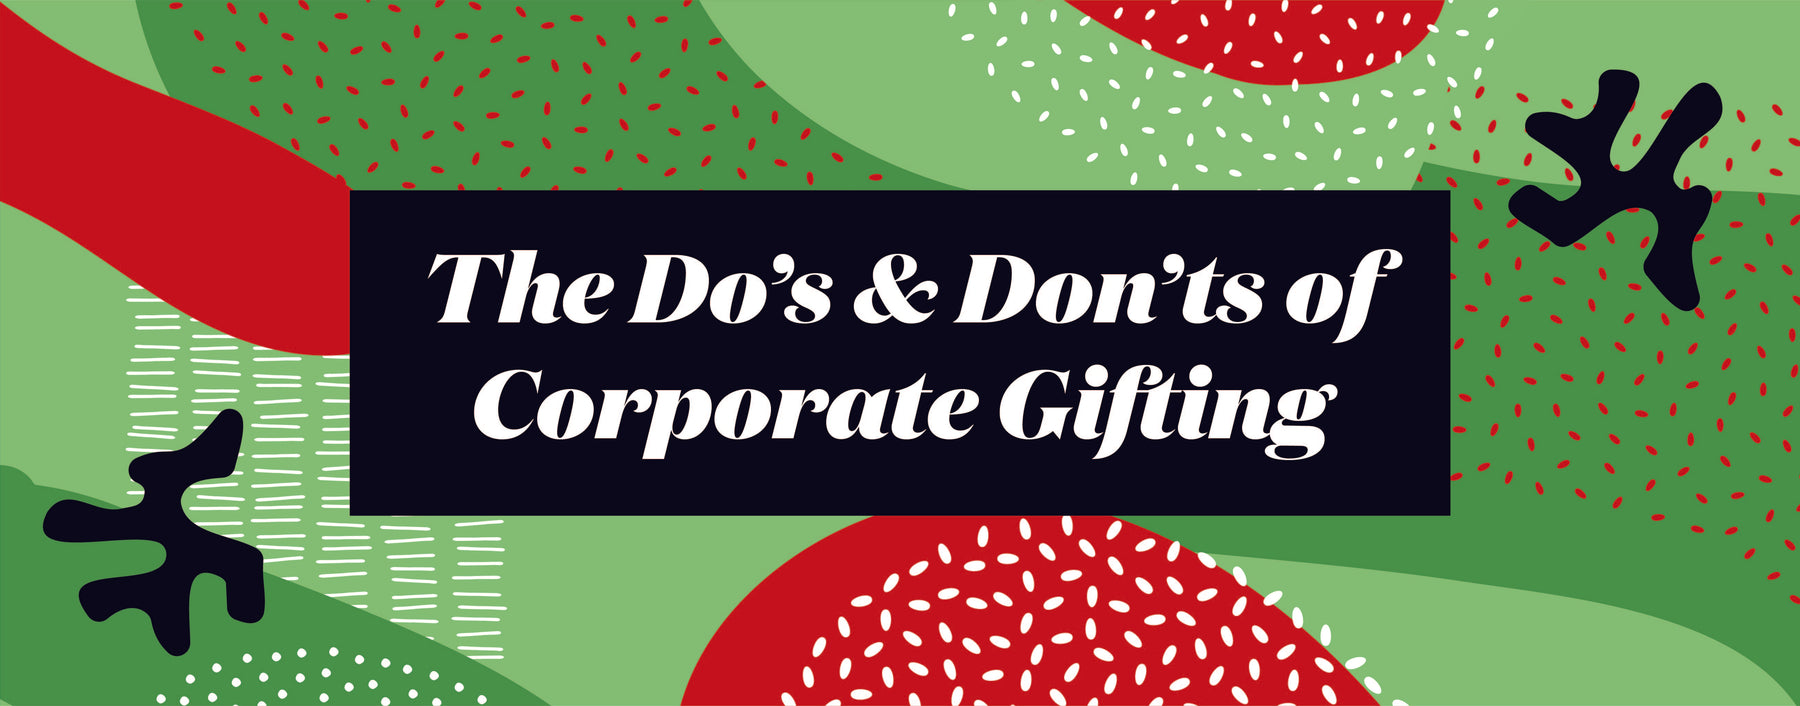 The Do's & Don'ts of Corporate Gifting in 2021